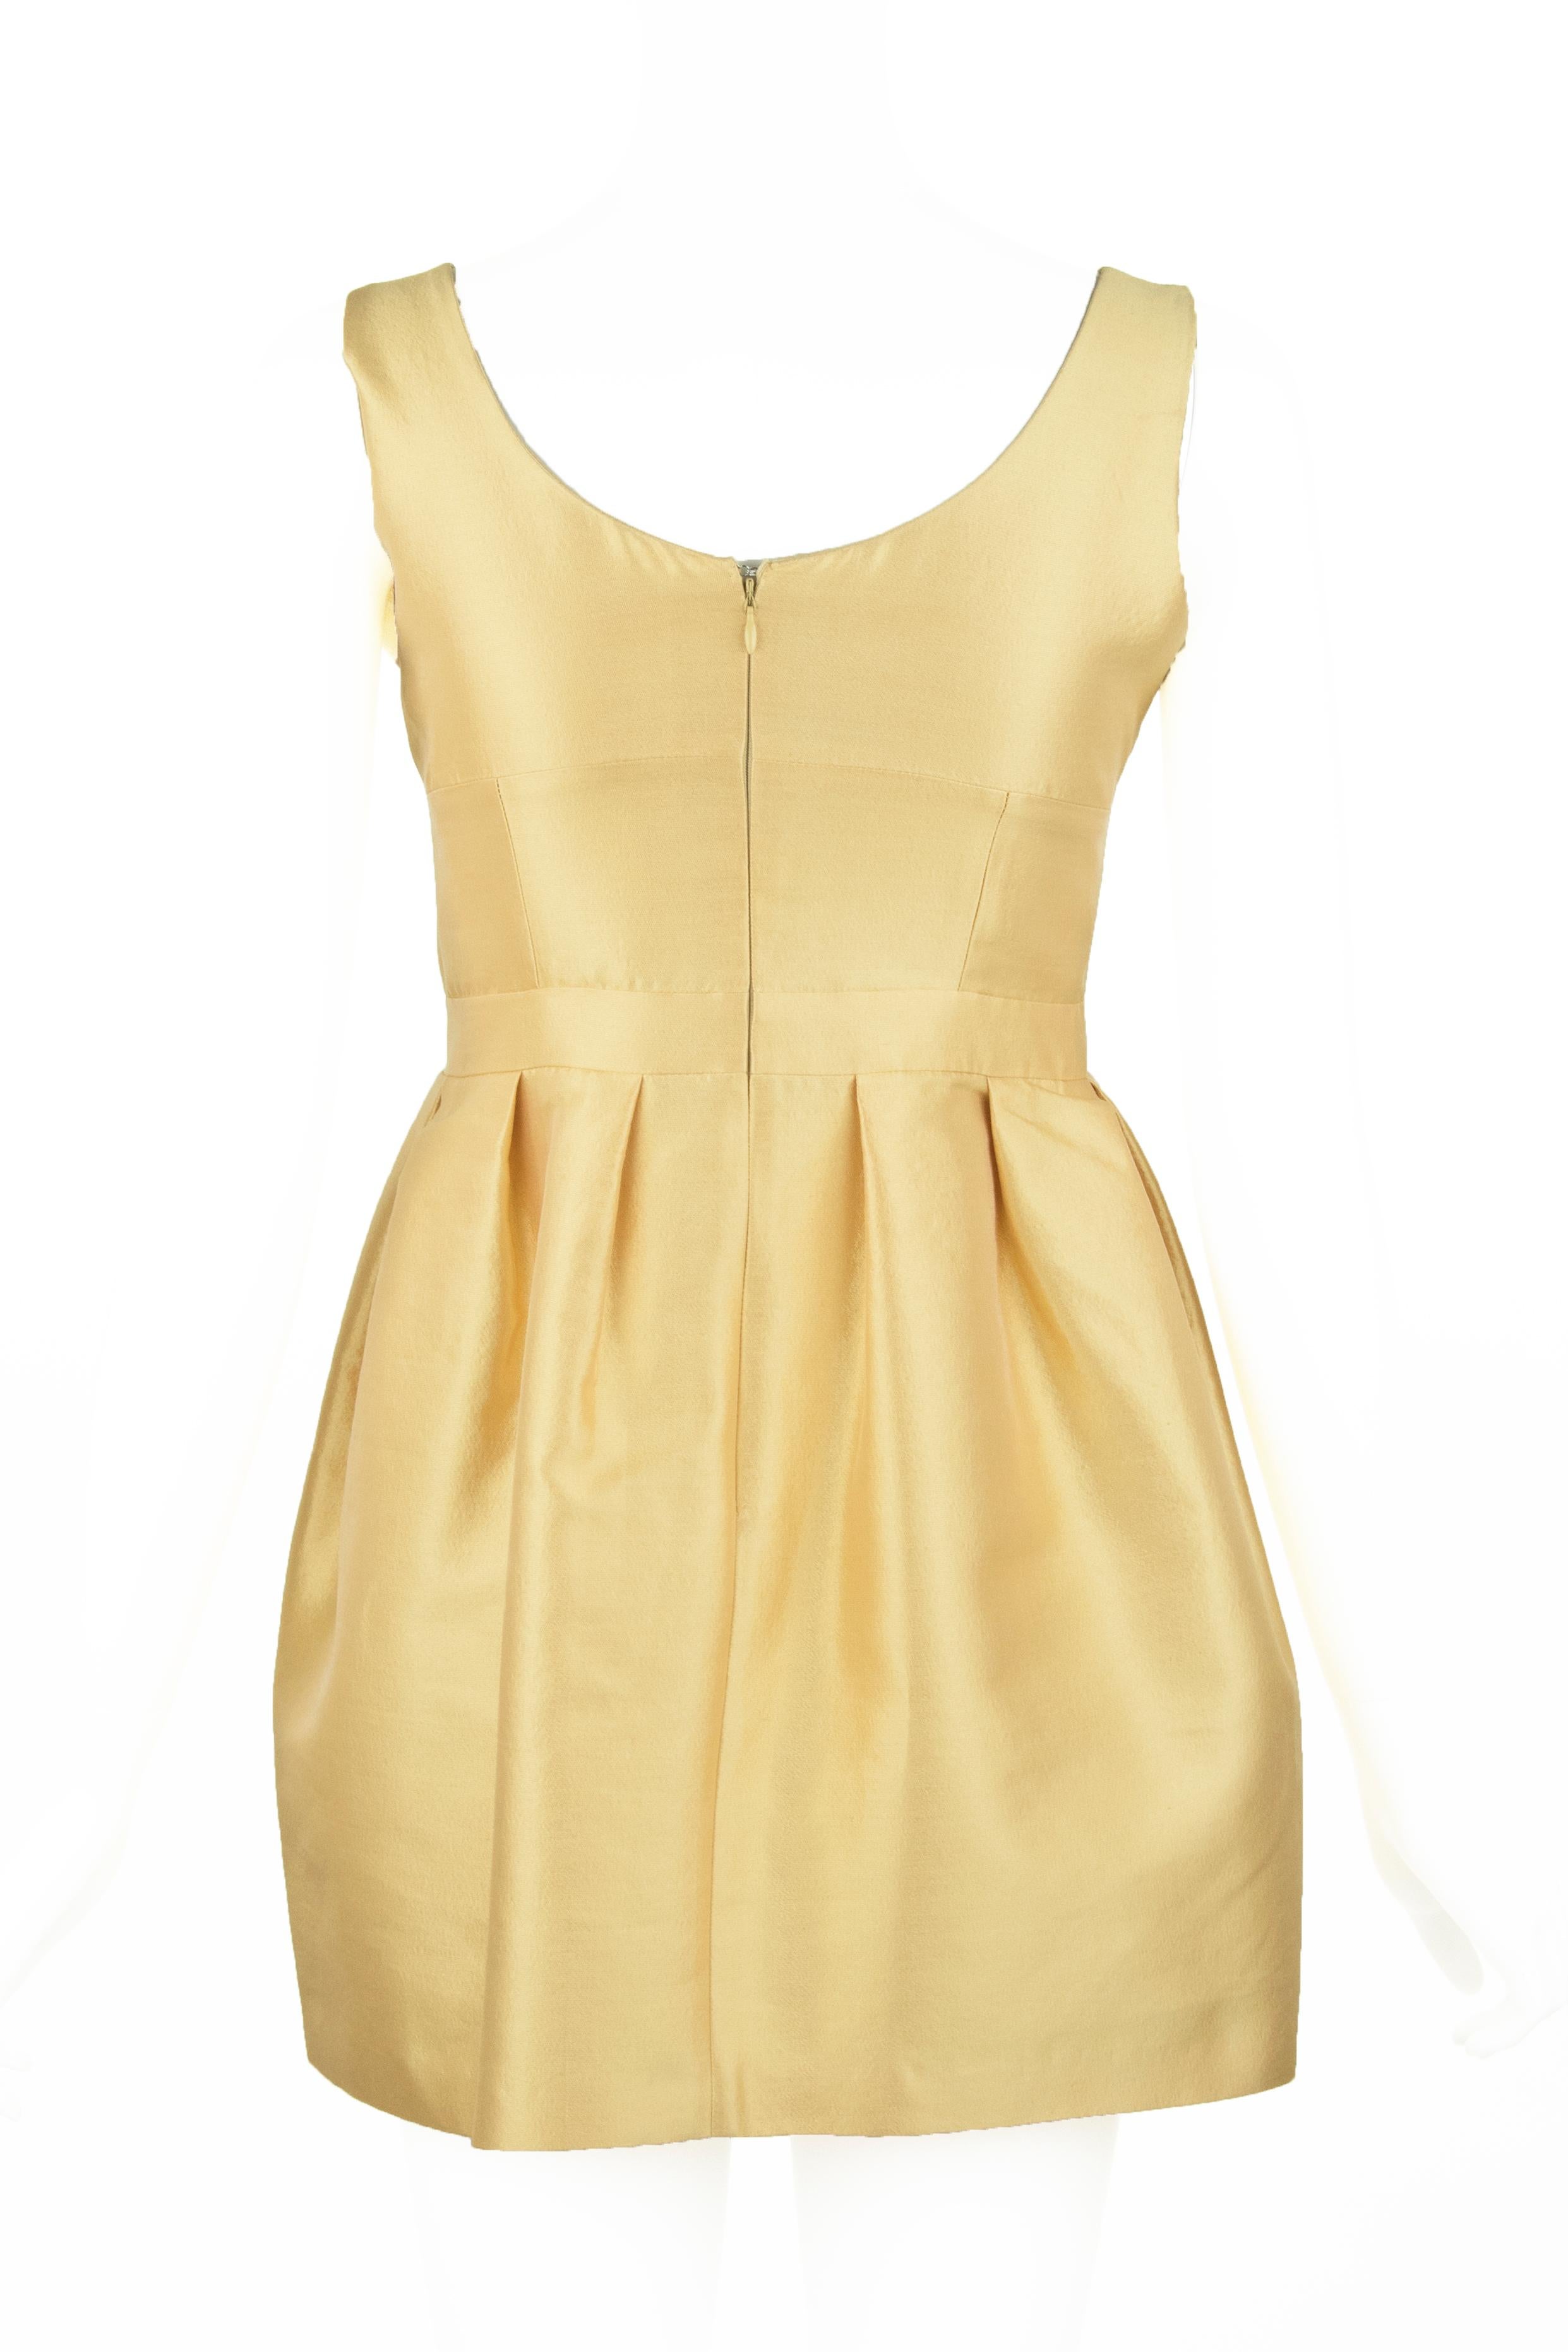 Prada Yellow Silk & Wool Sleeveless Dress - Size IT 42 In Excellent Condition For Sale In Newport, RI